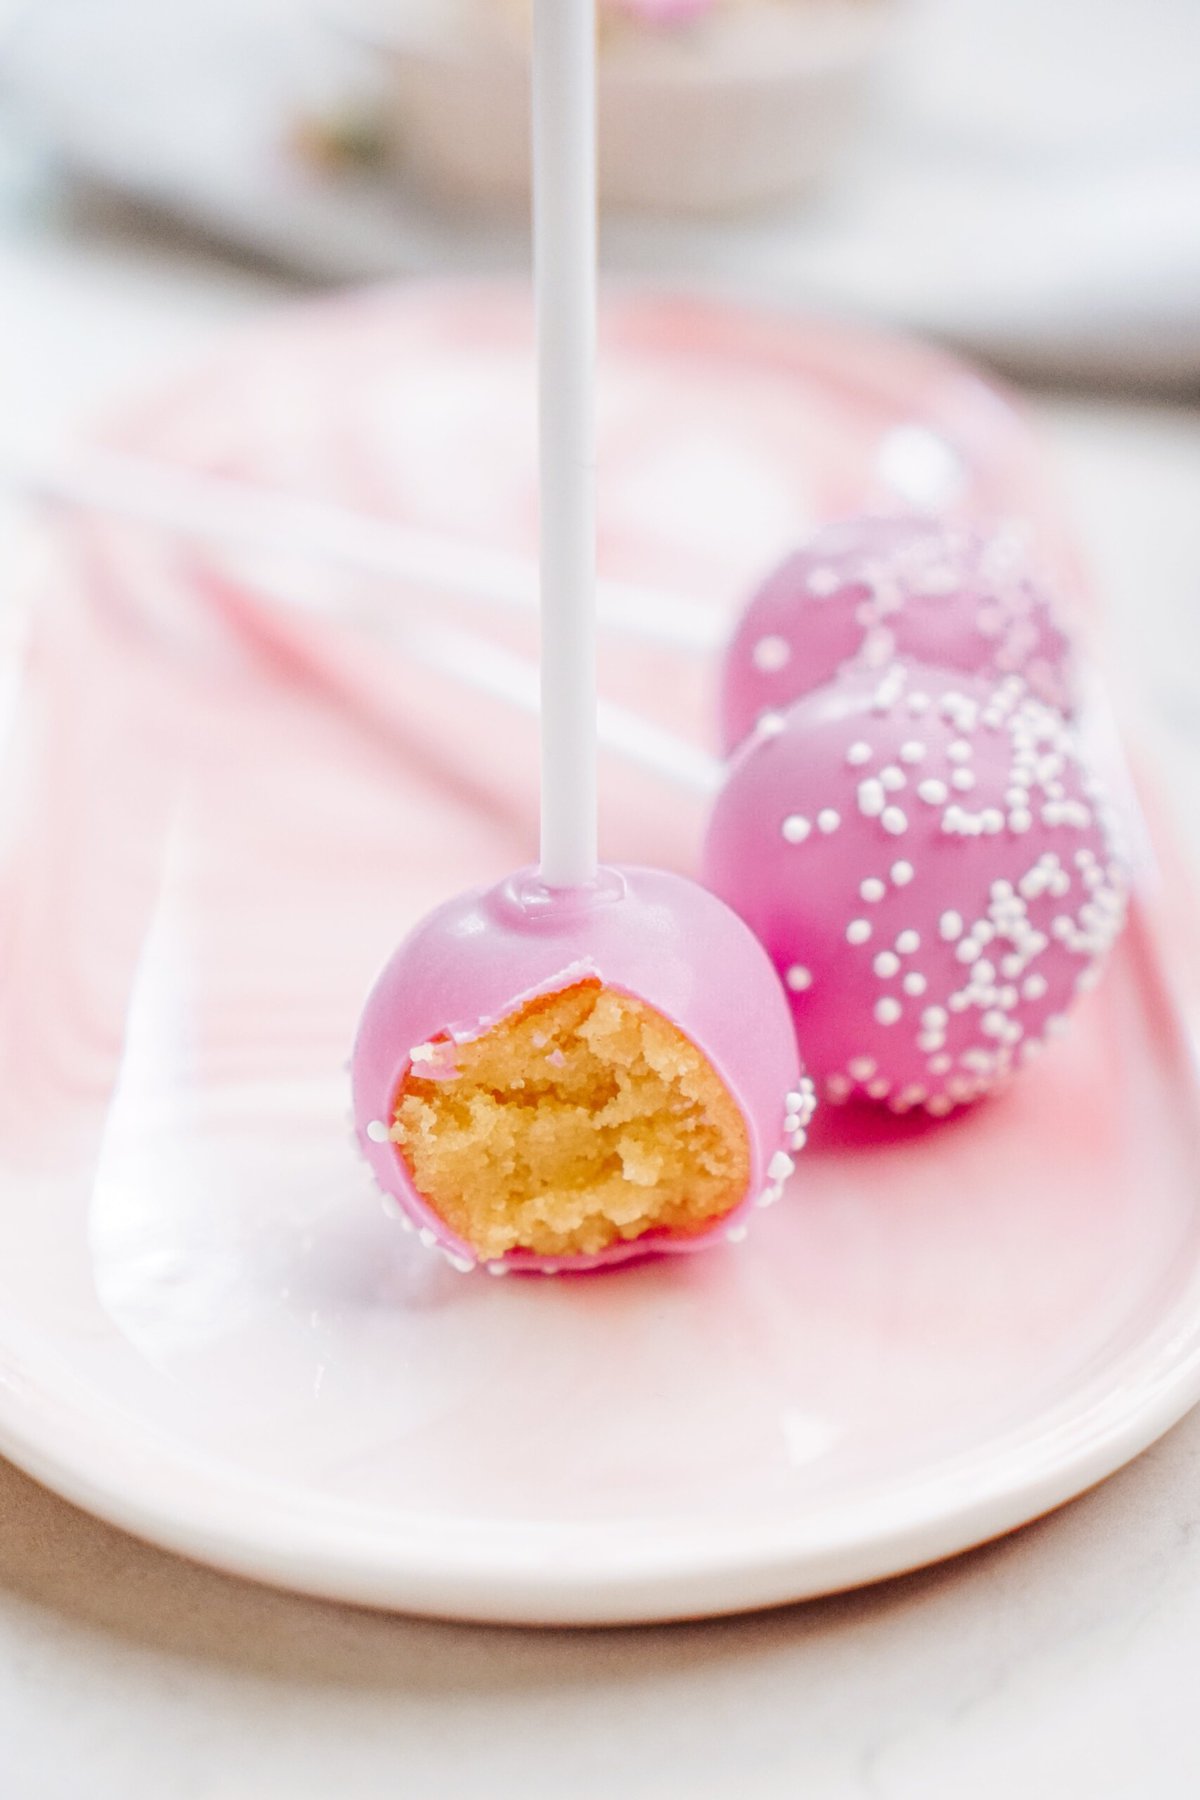 3 cake pops on a plate, one with a bite taken